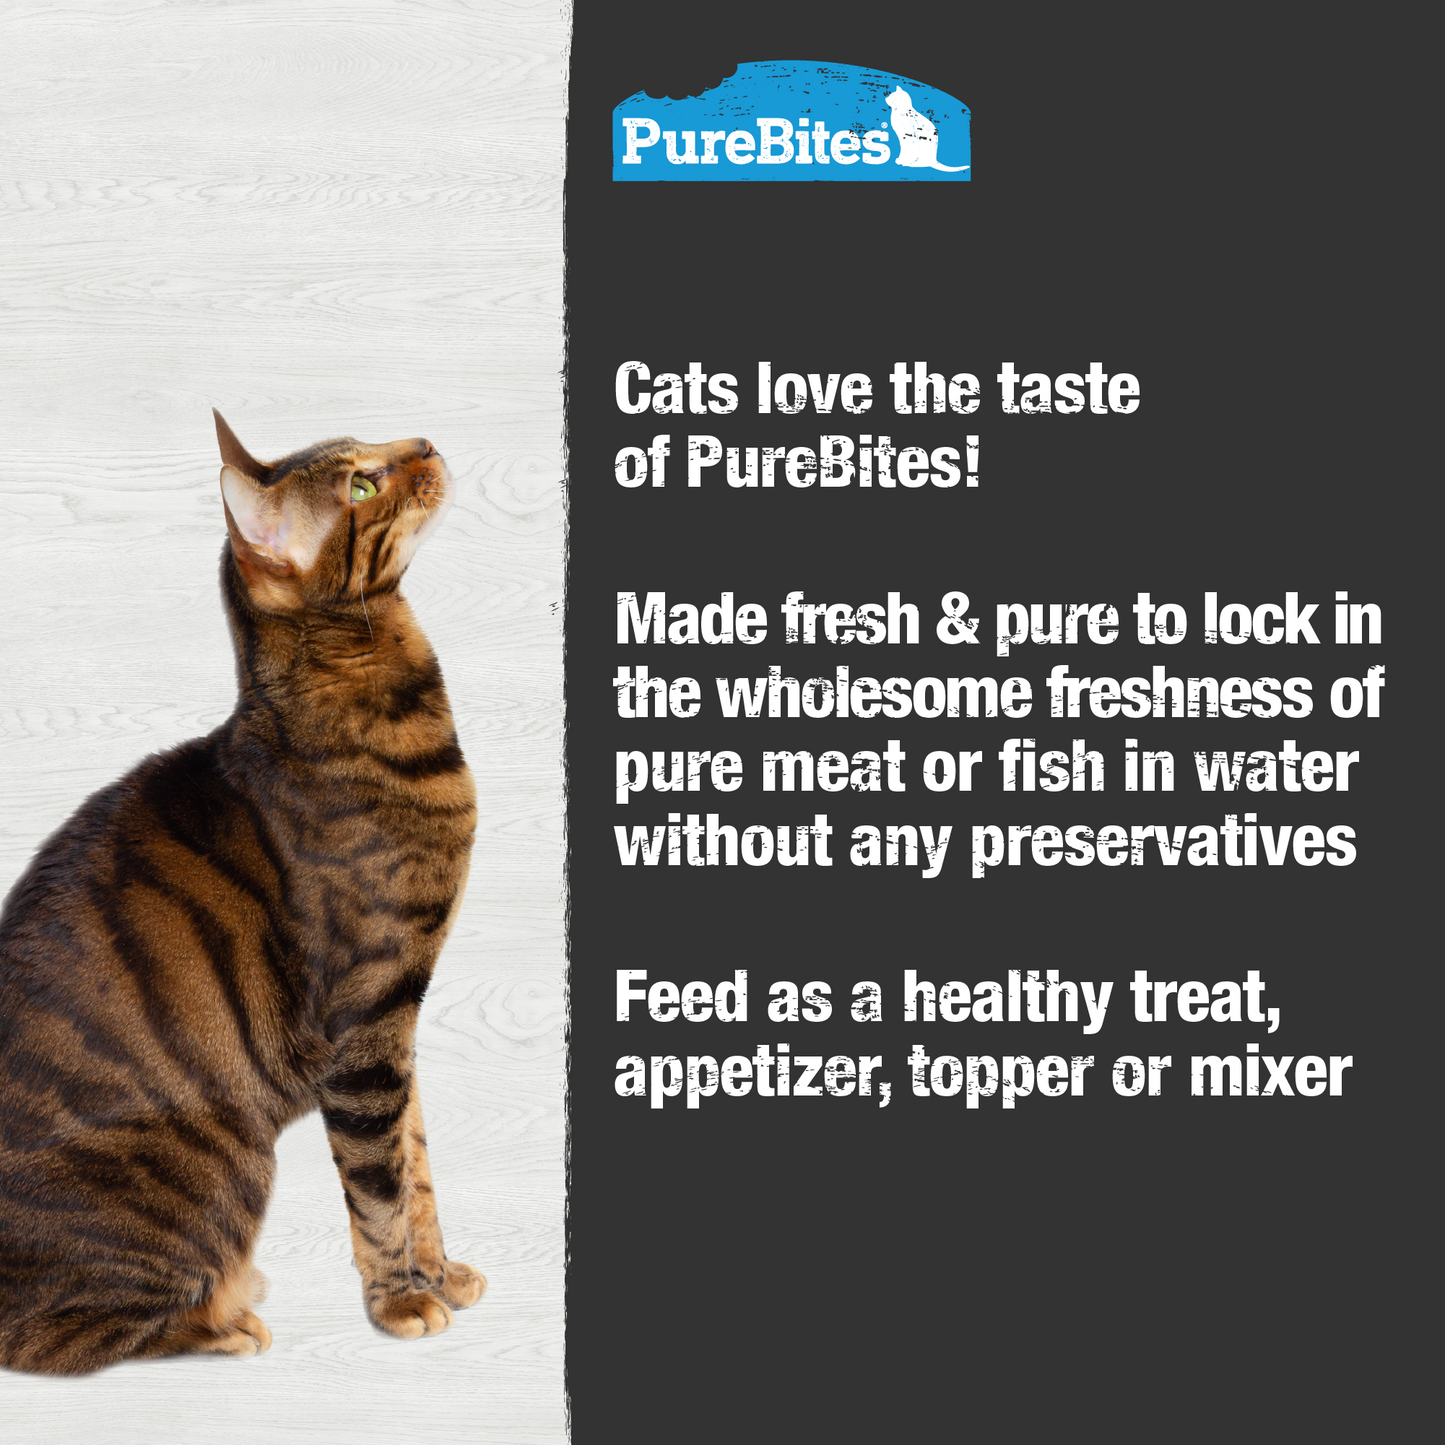 Made fresh & pure means more protein and nutrients packed into every tray. The tuna in our wet mixers is delicately steamed to help preserve the ingredient's taste, and nutrition, and mirror a cat’s ancestral diet